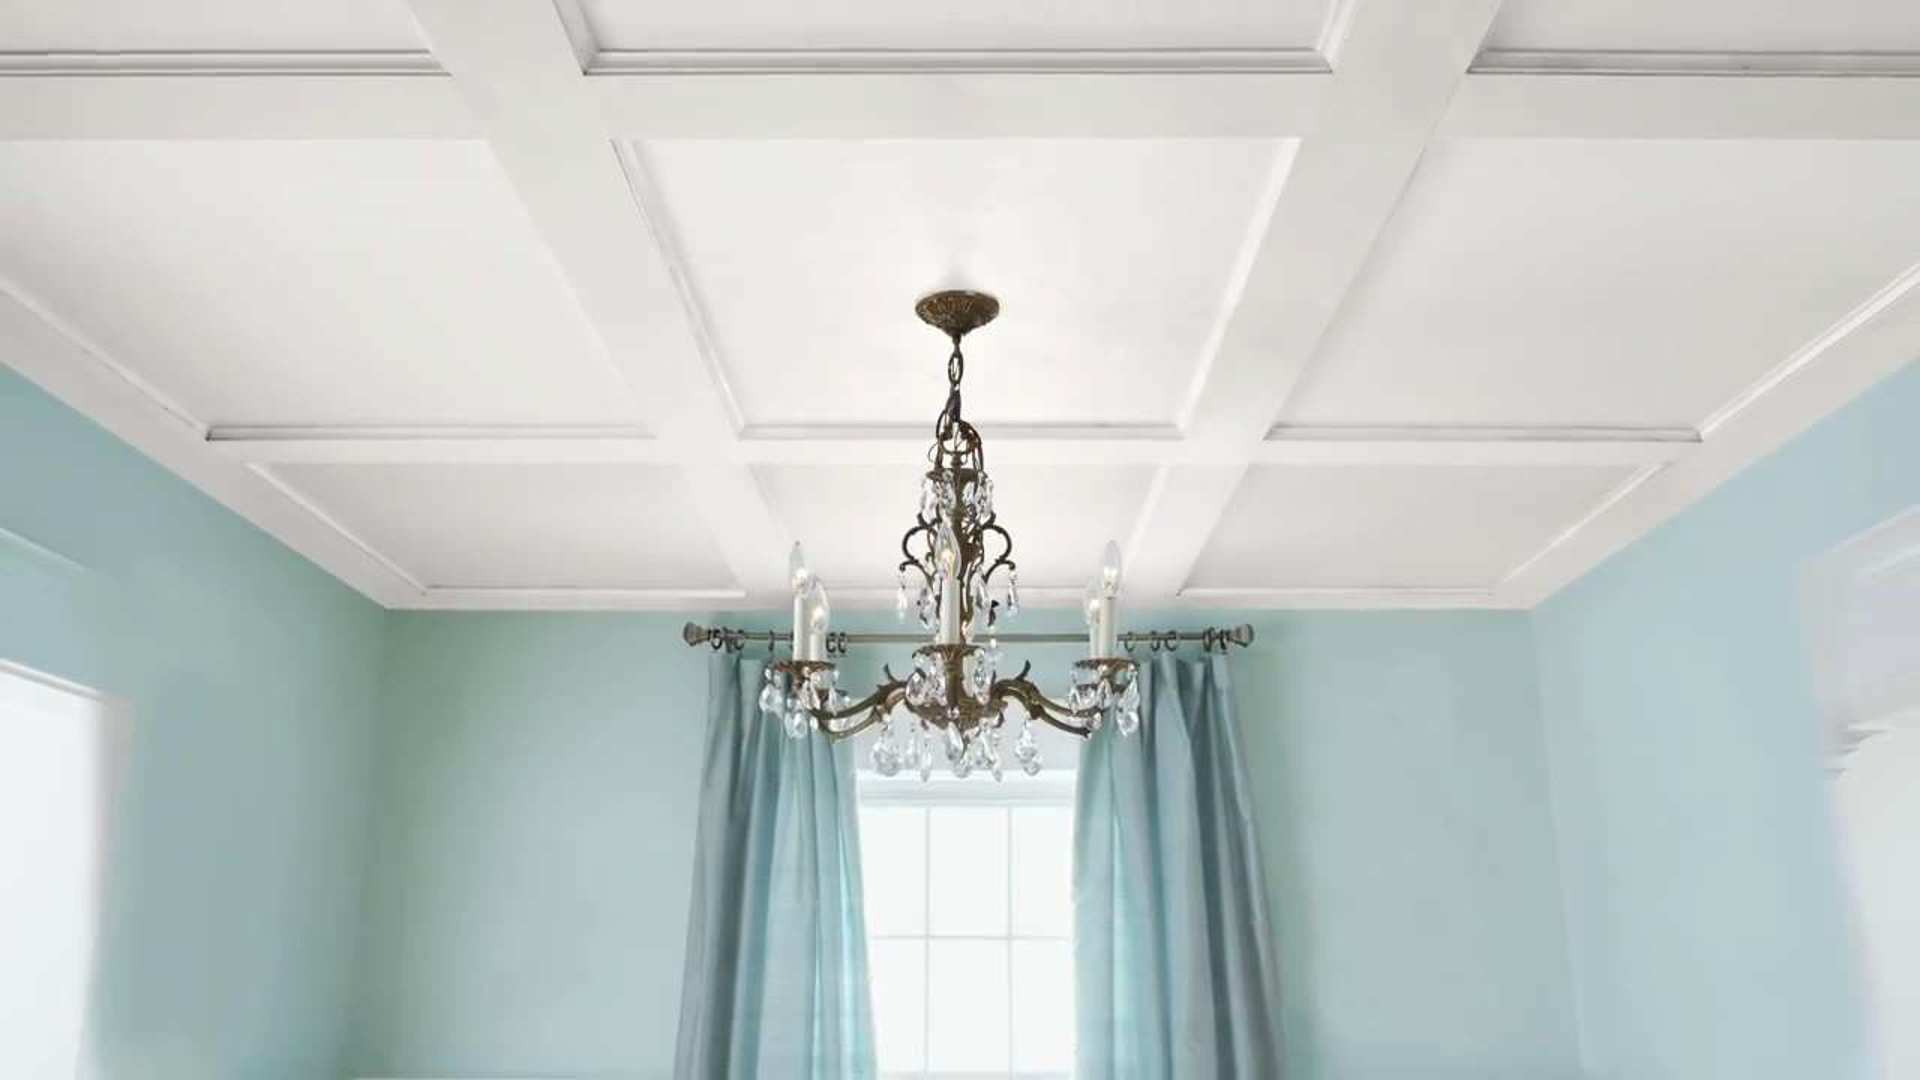 How To Build A Coffered Ceiling This Old House